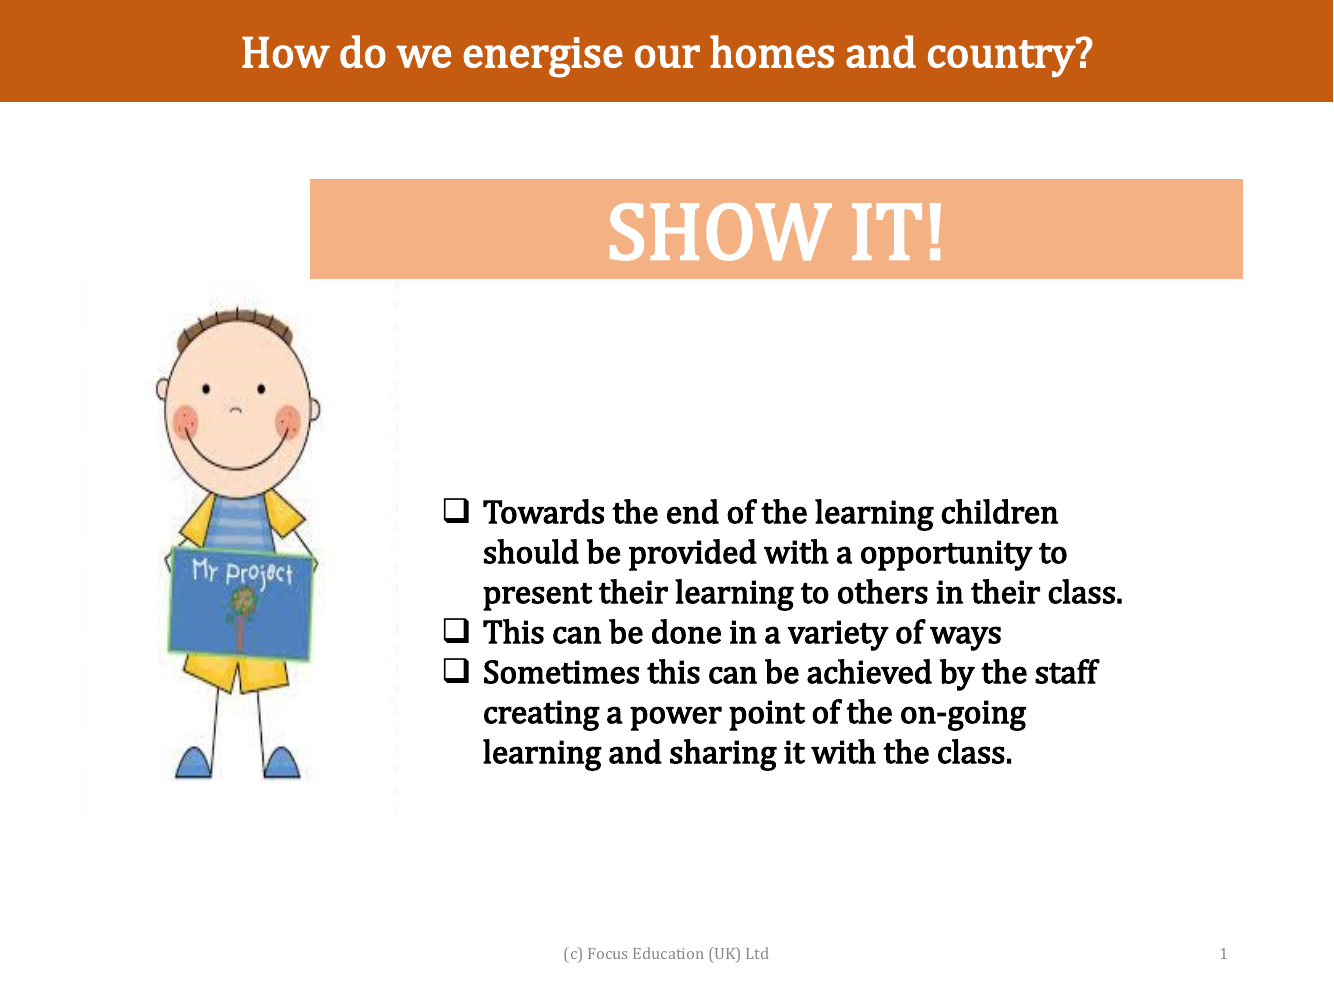 Show it! - Energy - 2nd Grade